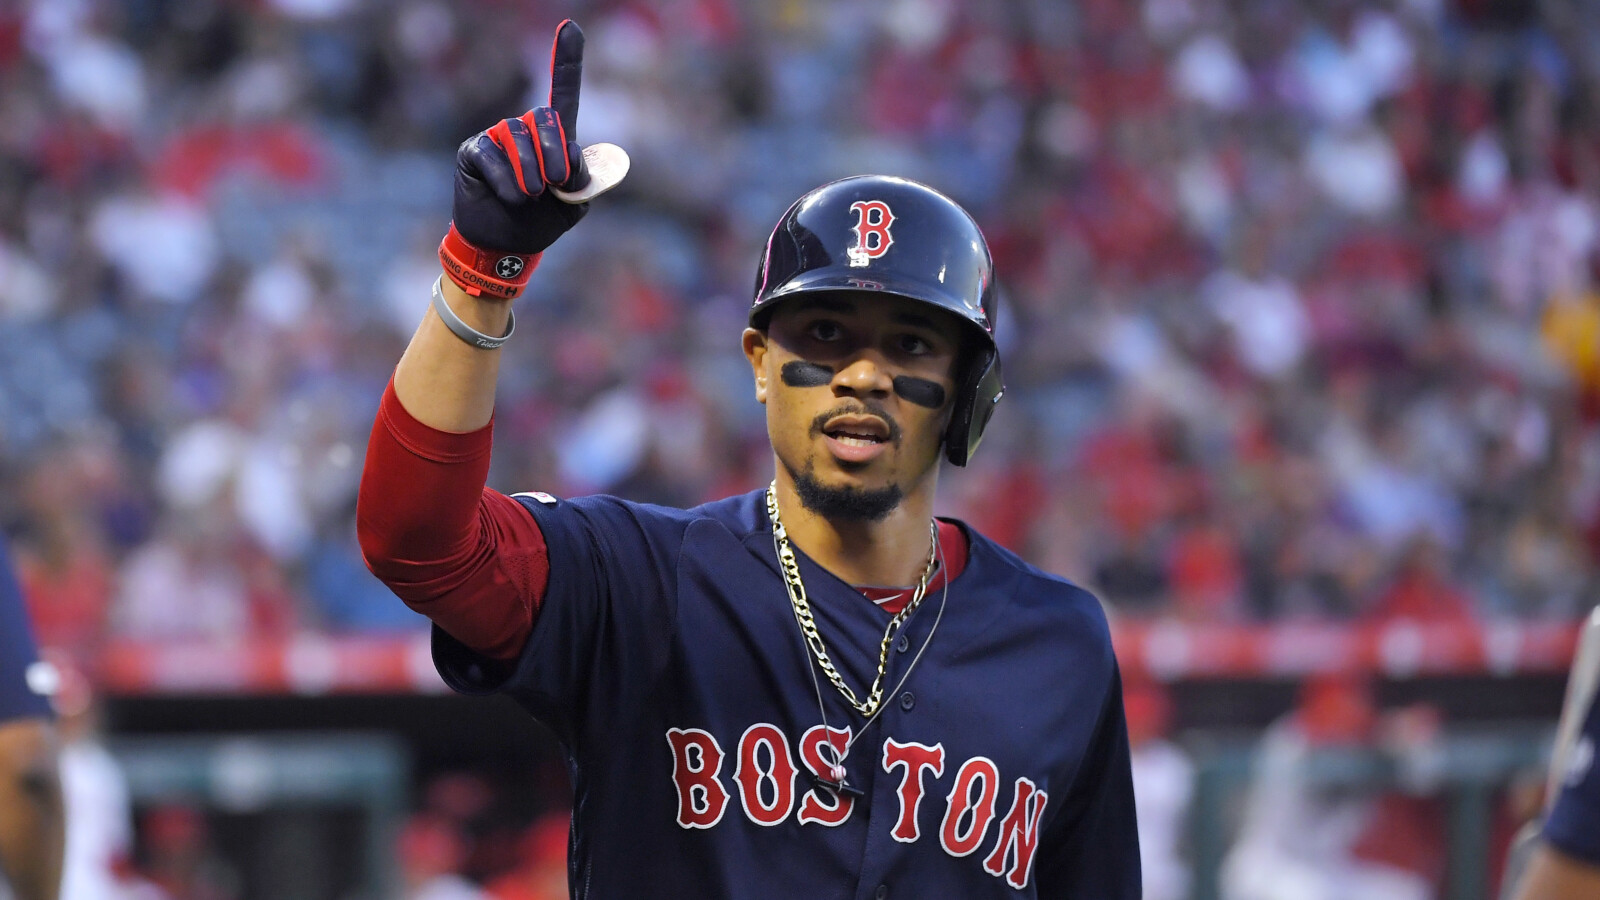 Dodgers finalize trade for Mookie Betts, David Price from Red Sox